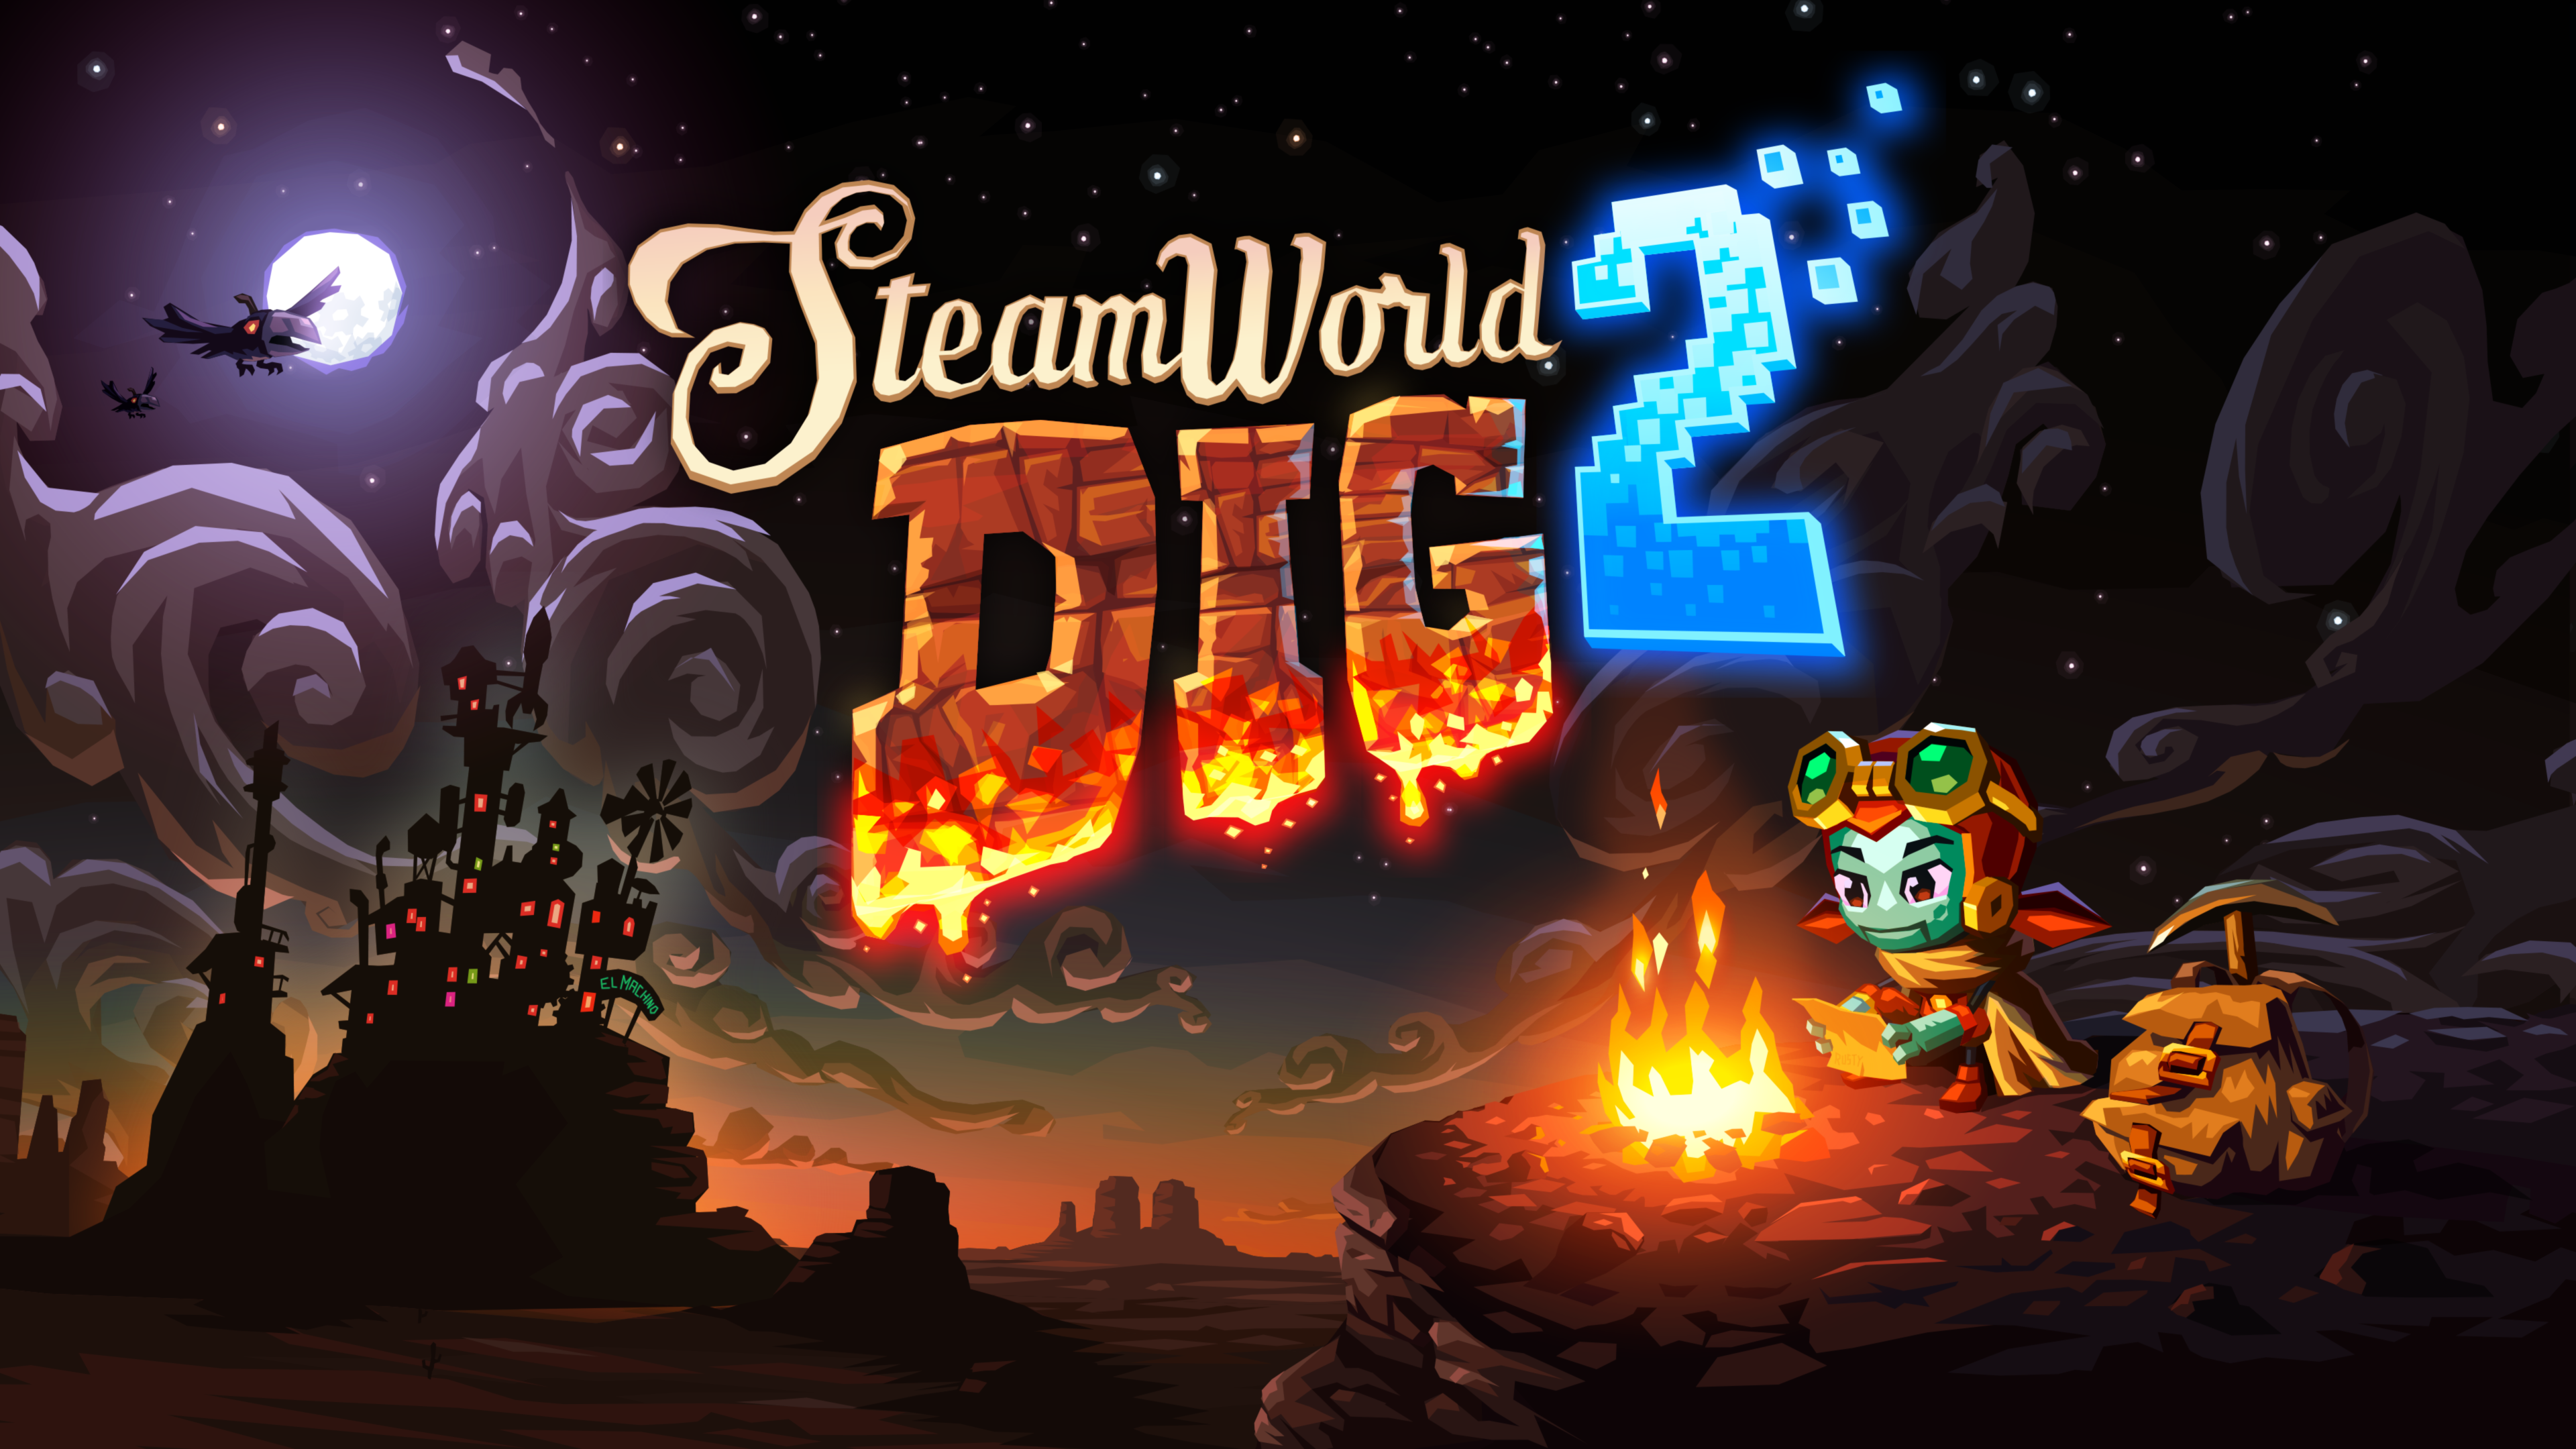 HD desktop wallpaper of SteamWorld Dig 2 featuring the character Rusty by a campfire set against a night landscape with the game's logo above.